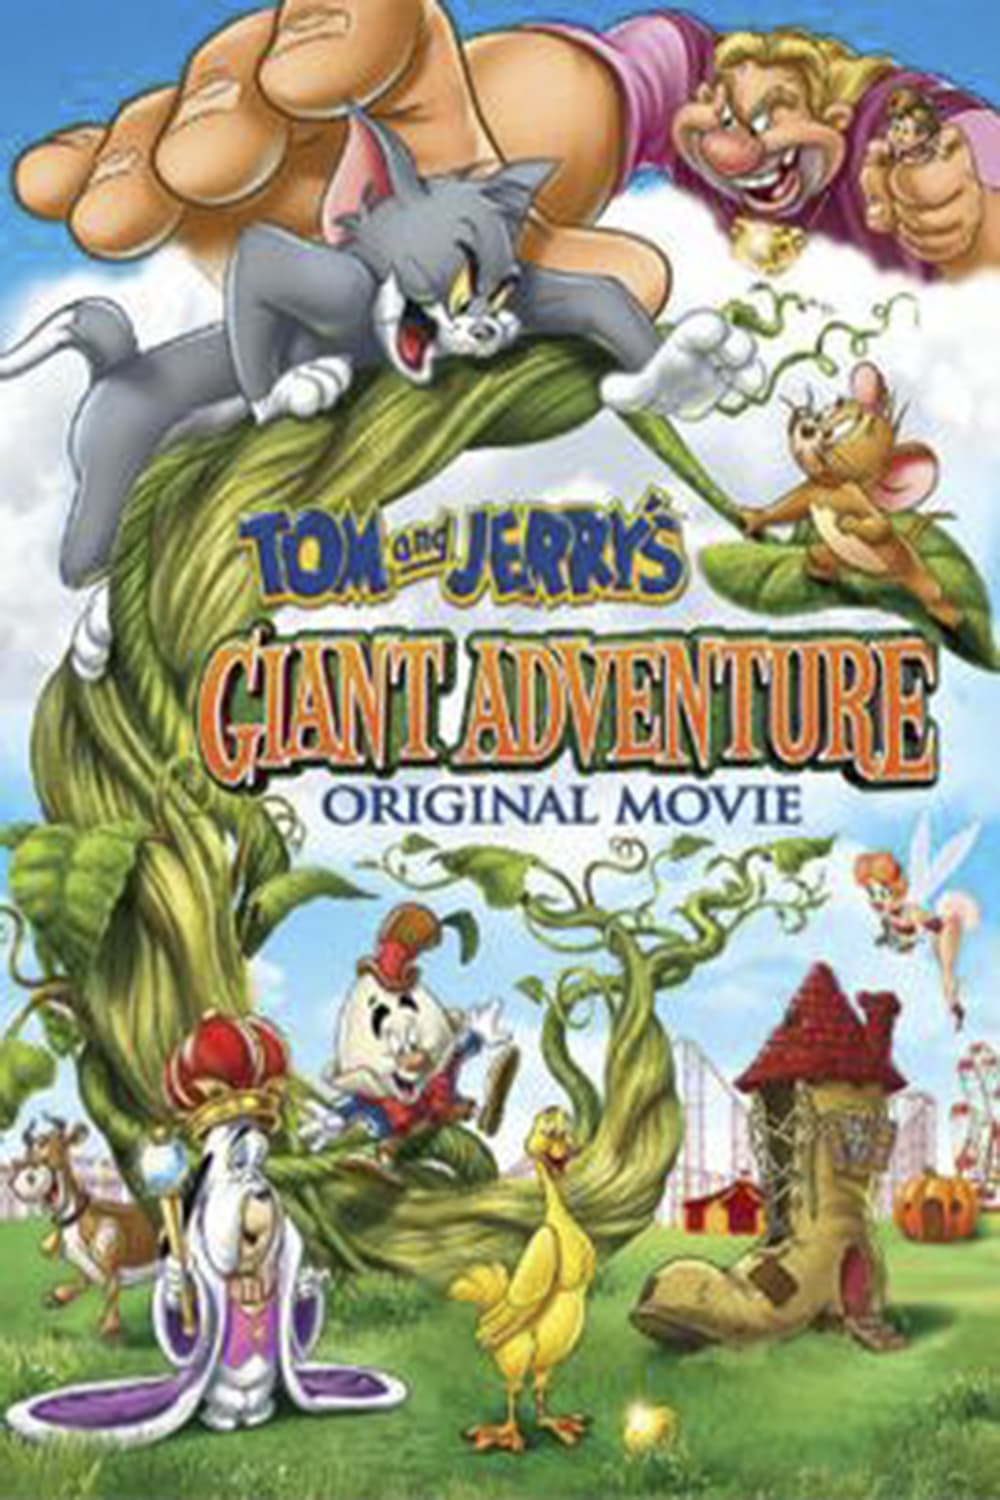 Poster for the movie "Tom and Jerry's Giant Adventure"